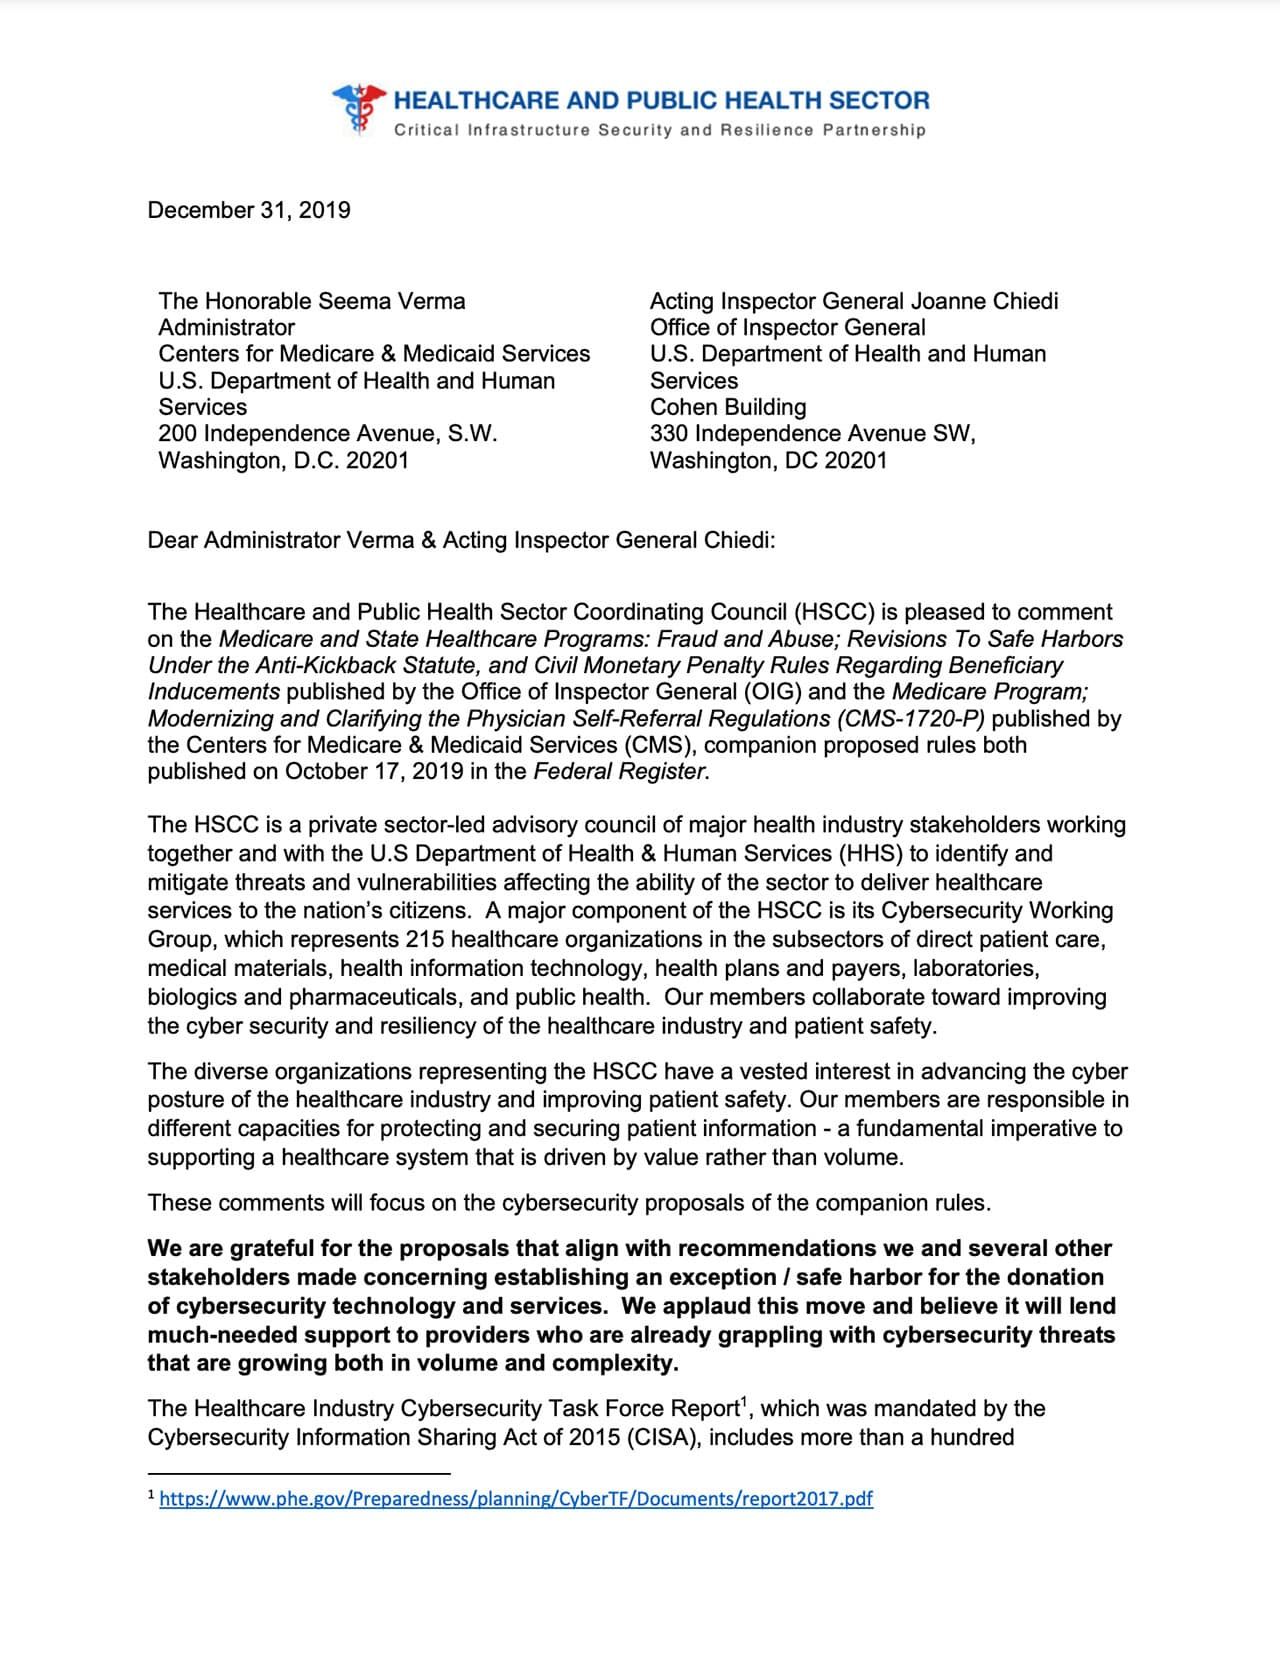 HSCC Letter To CMS And OIG On Stark And AKS